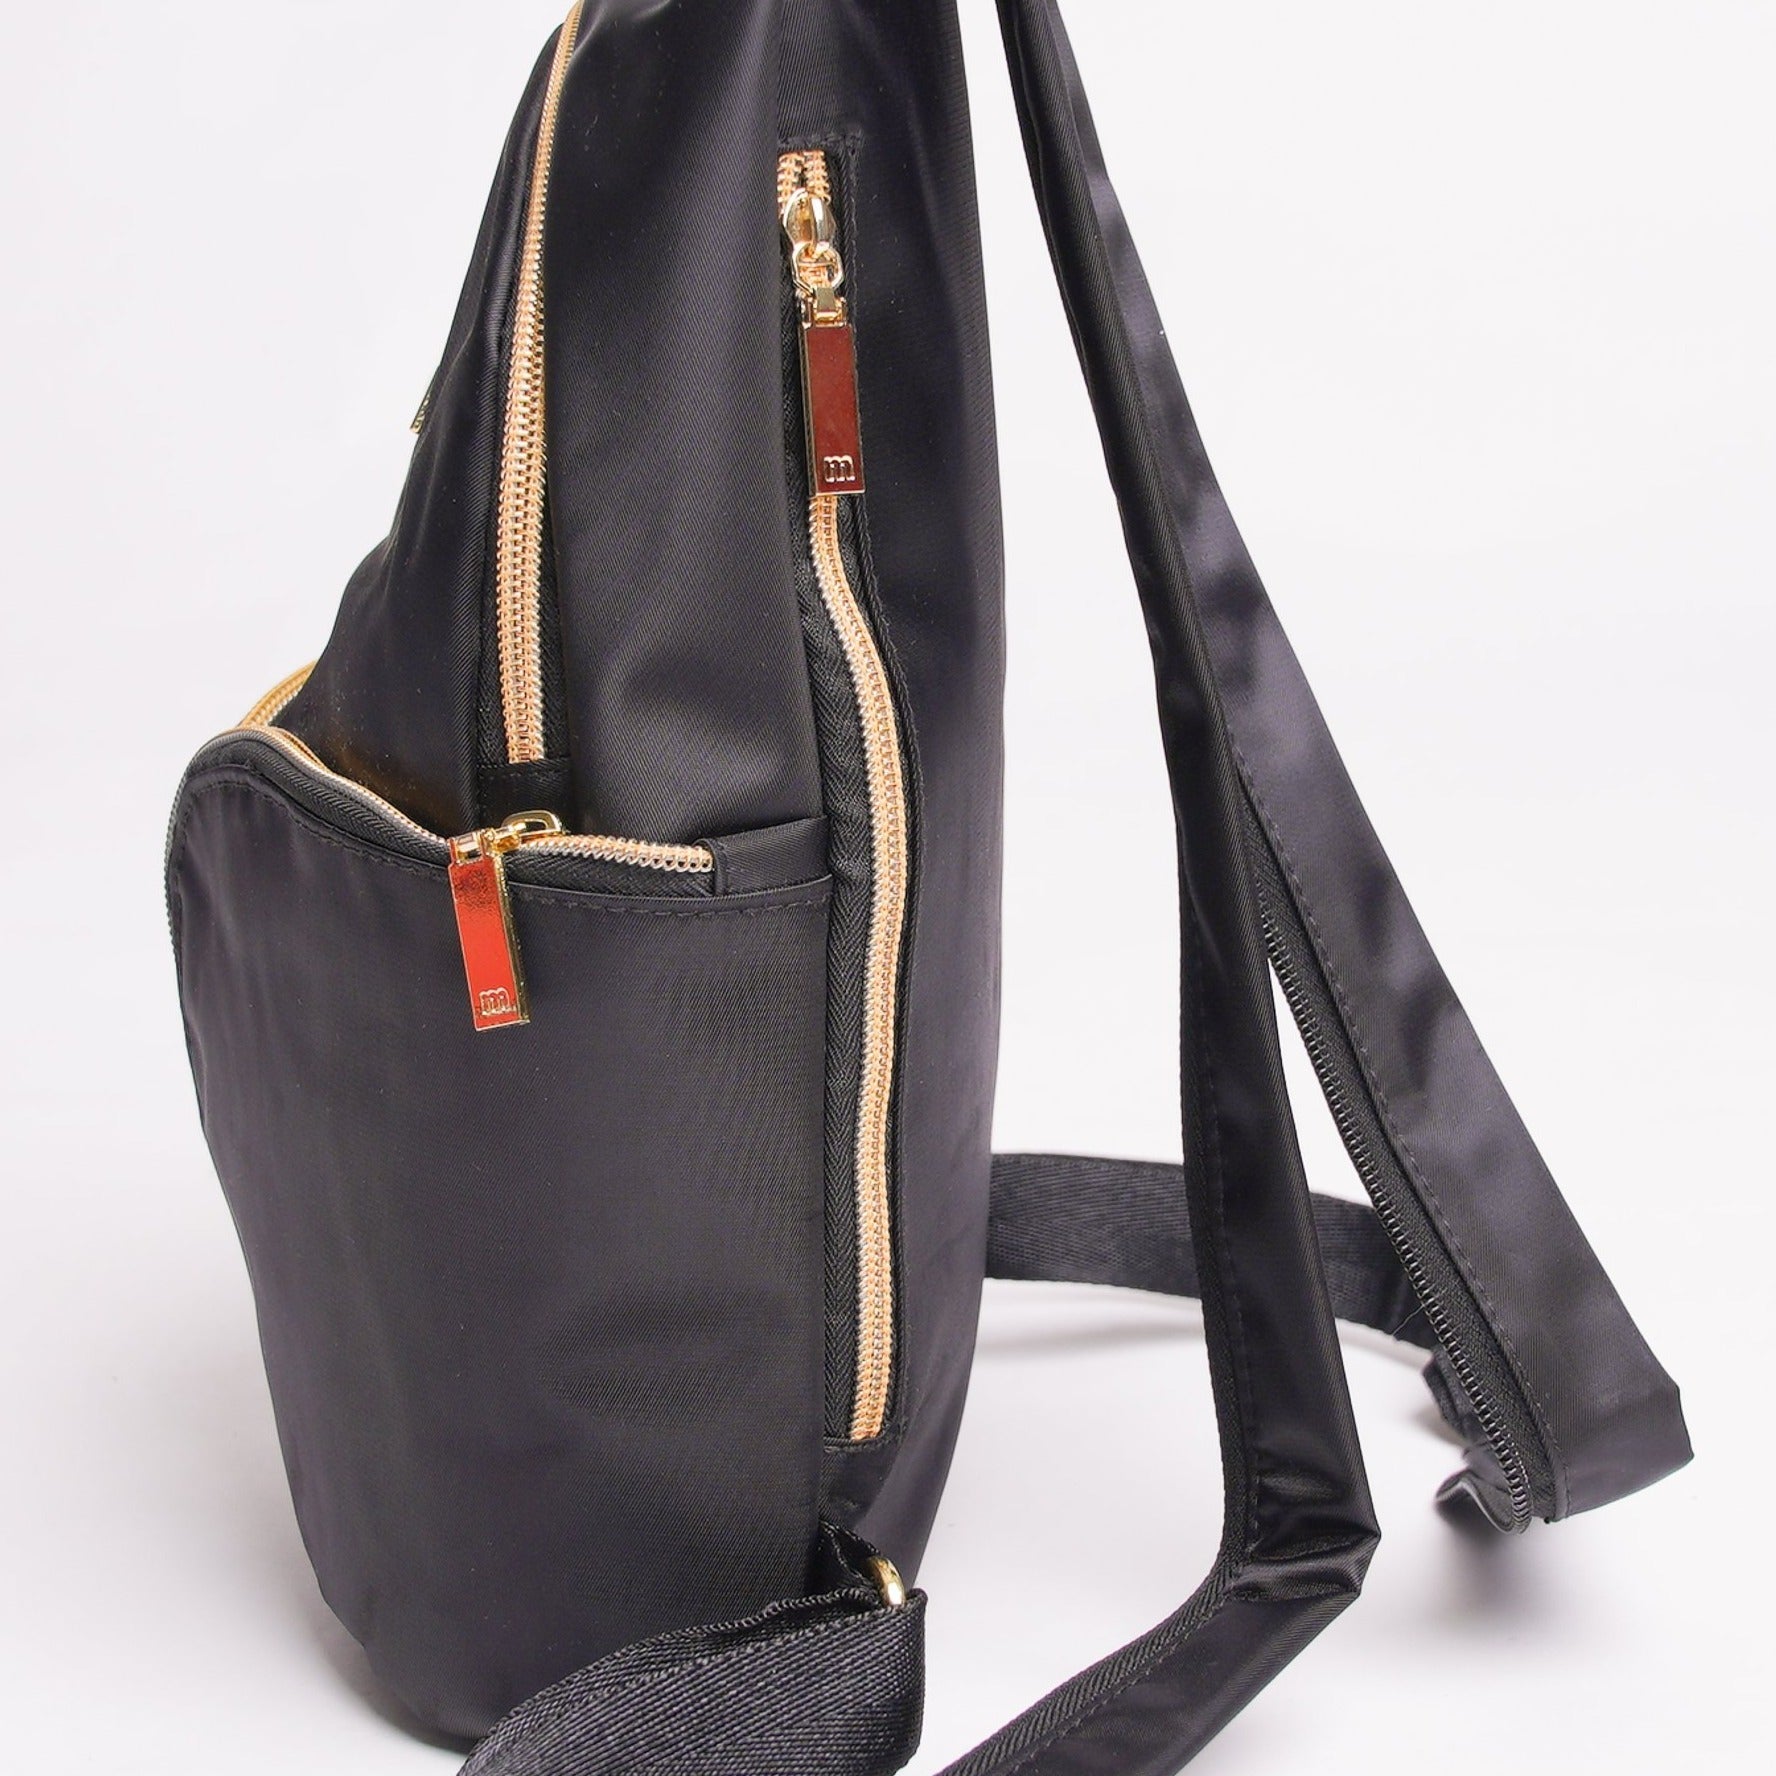 Zipper Strap Backpack - Mossimo PH